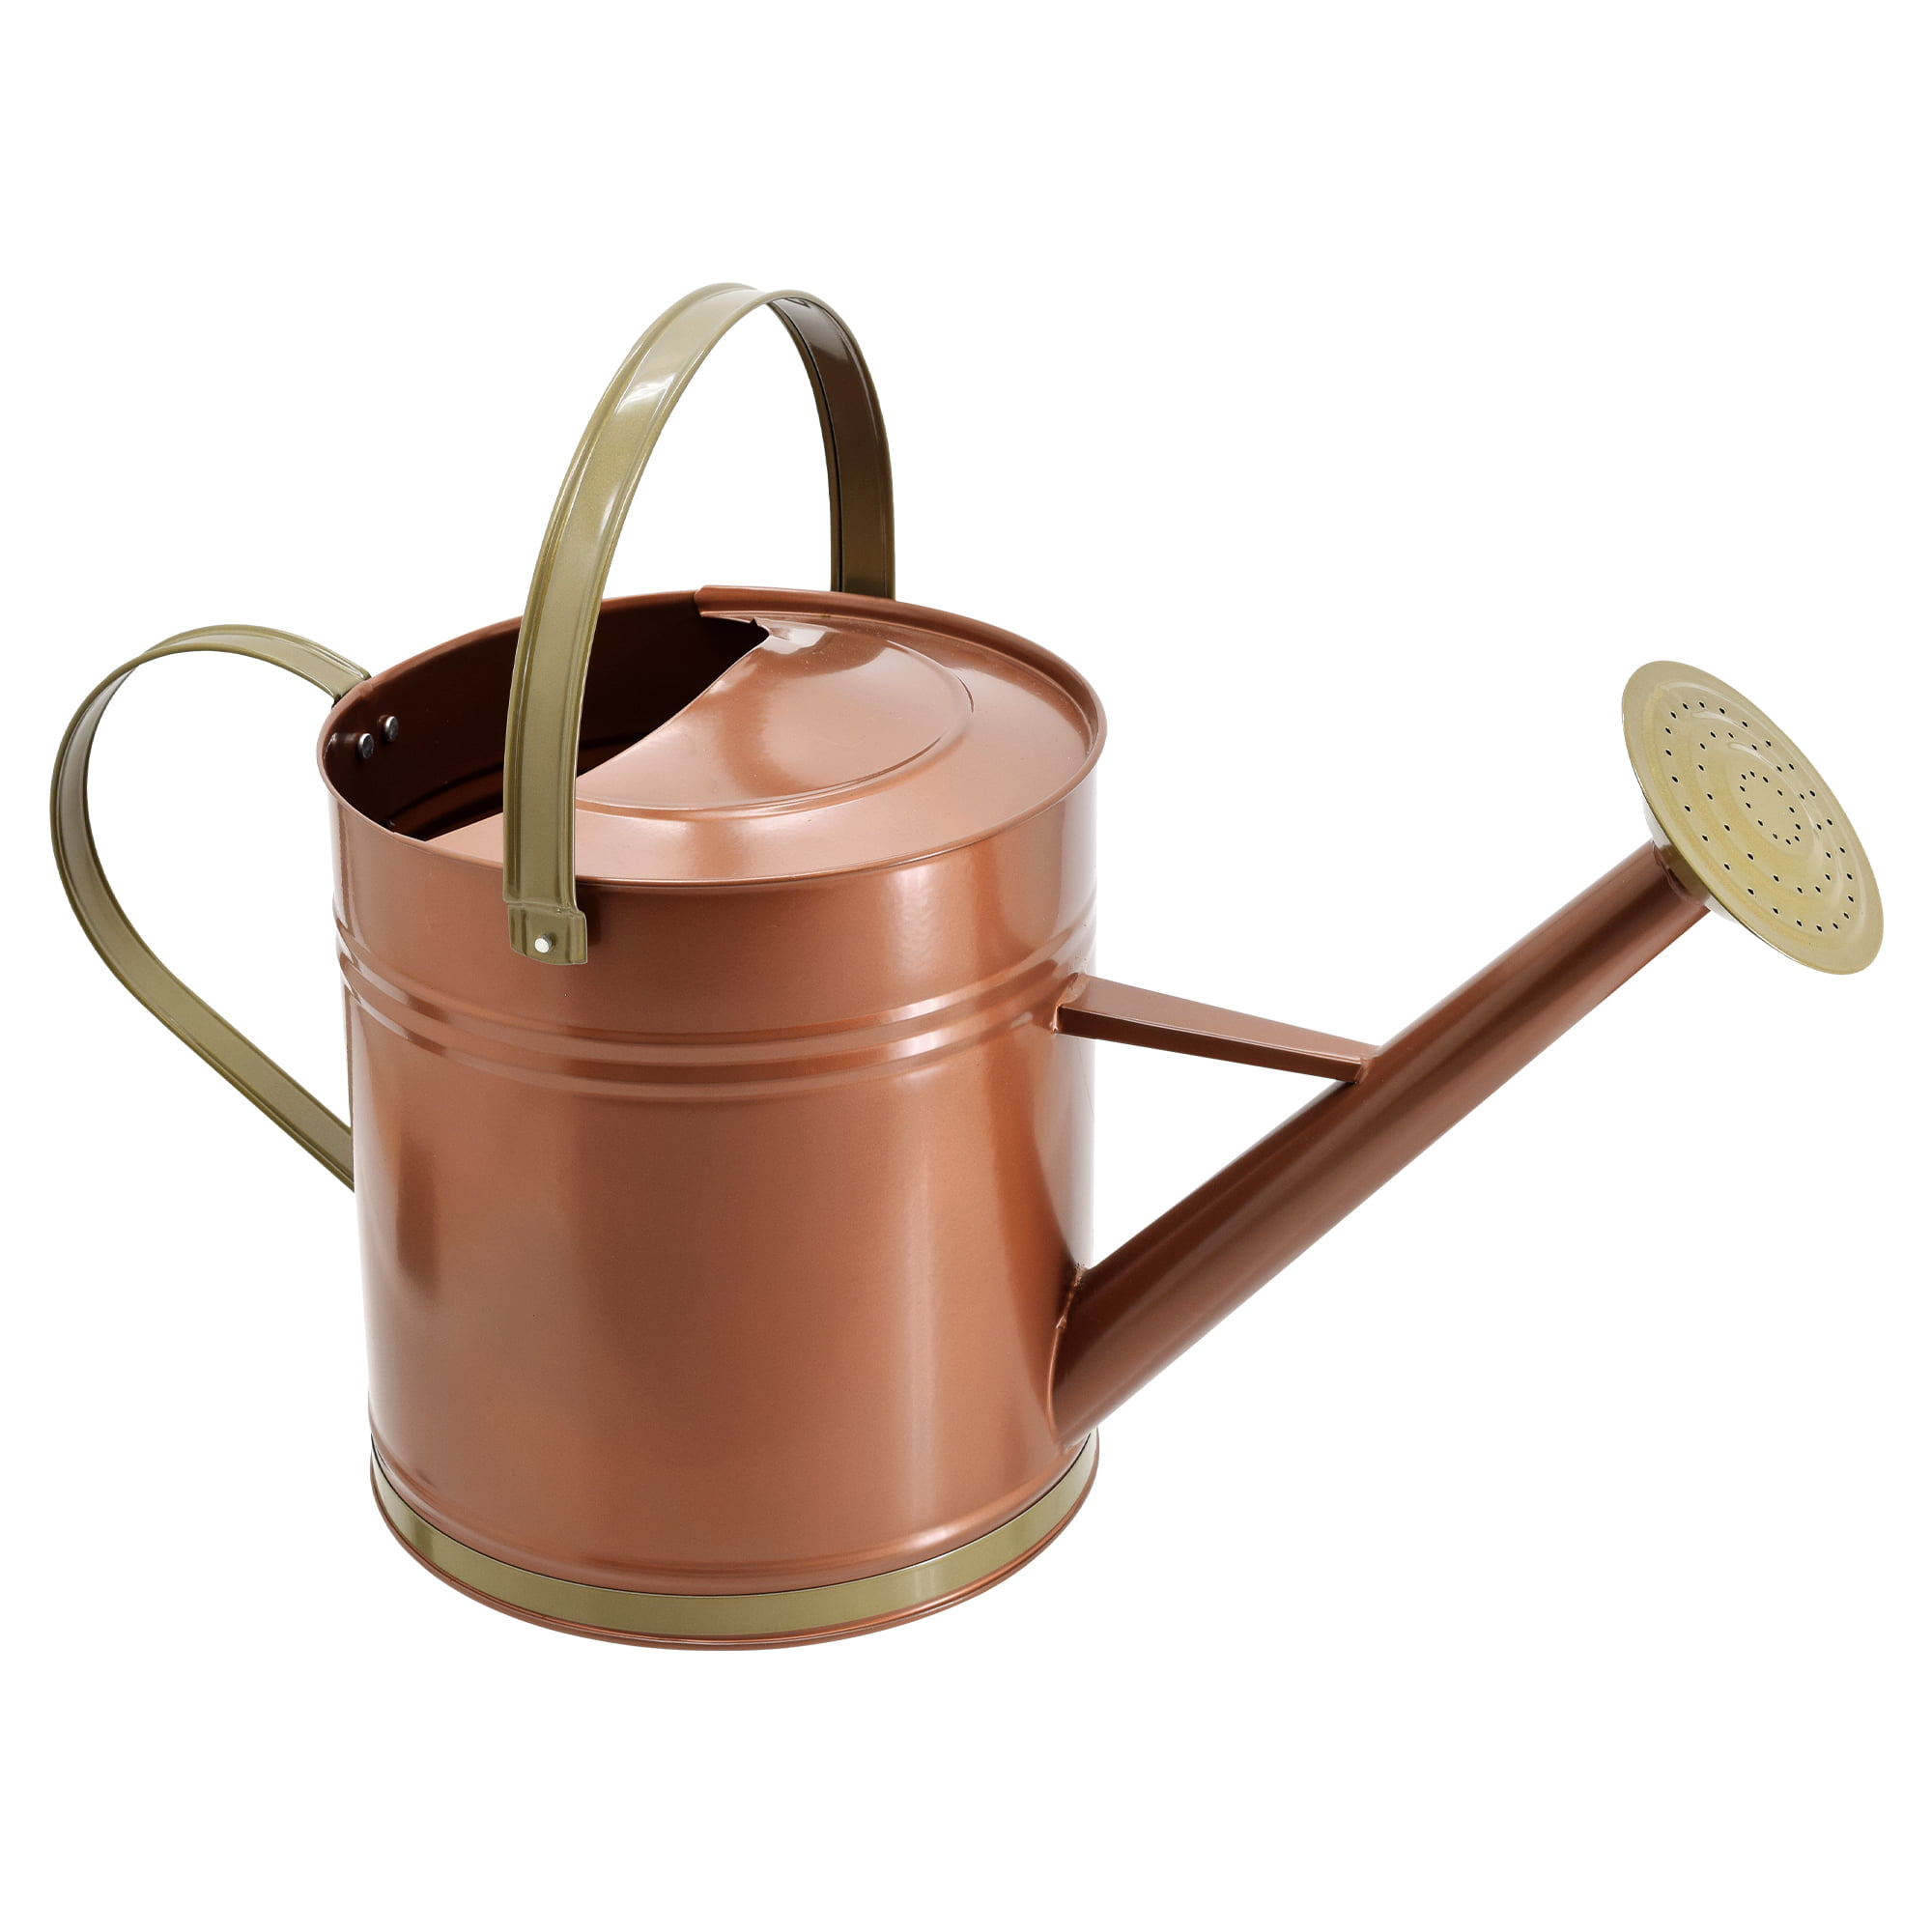 Tierra Garden 36-5081o Traditional Watering Can 2.1-gallon Orange for sale online 